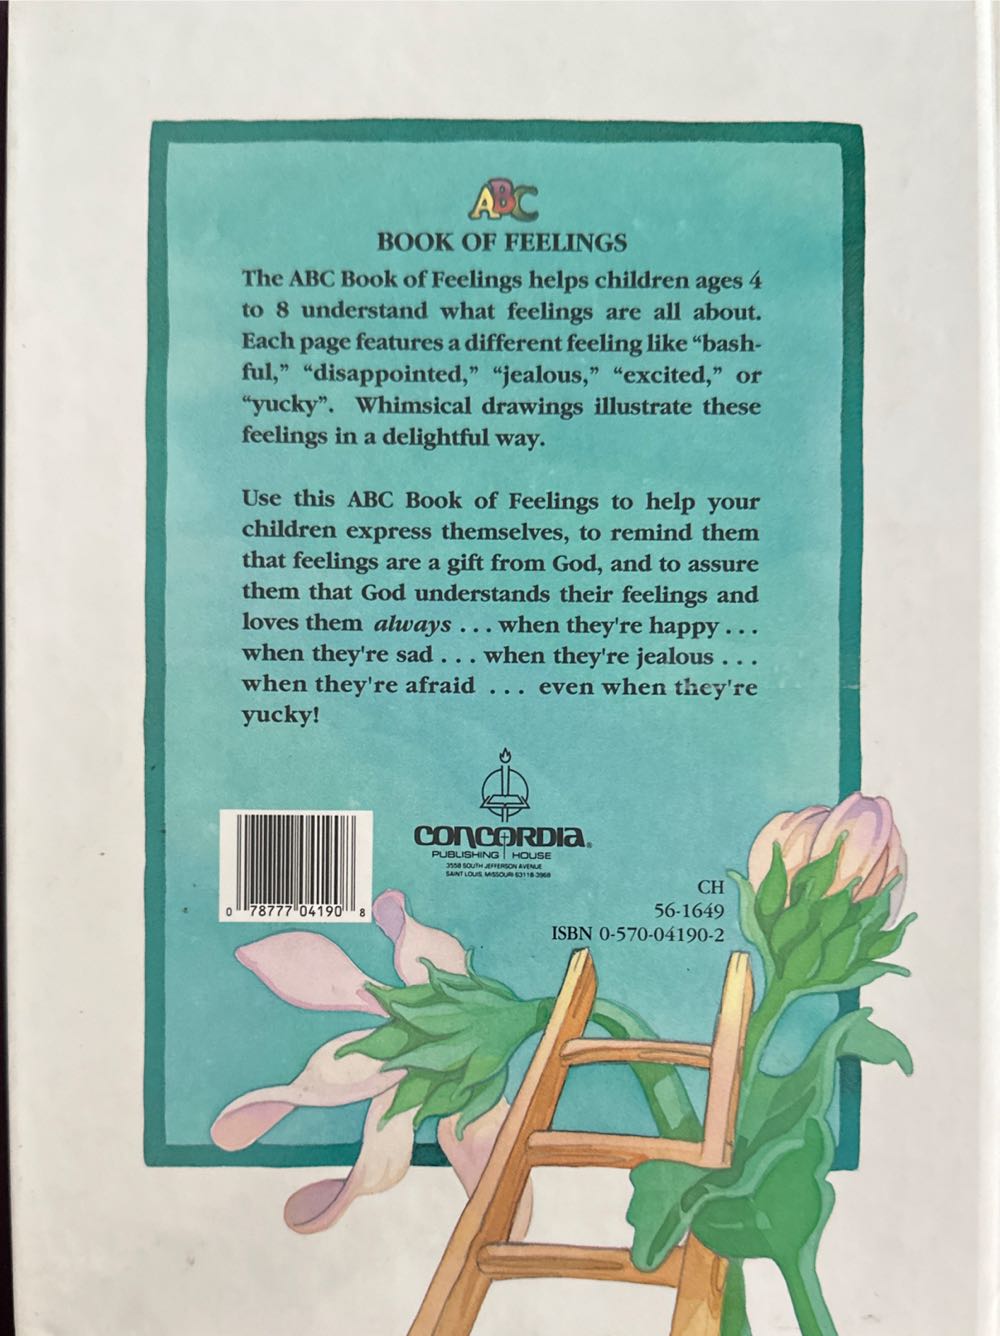 ABC Book of Feelings - Marlys Boddy (Concordia Oublishing House - Hardcover) book collectible [Barcode 9780570041900] - Main Image 2